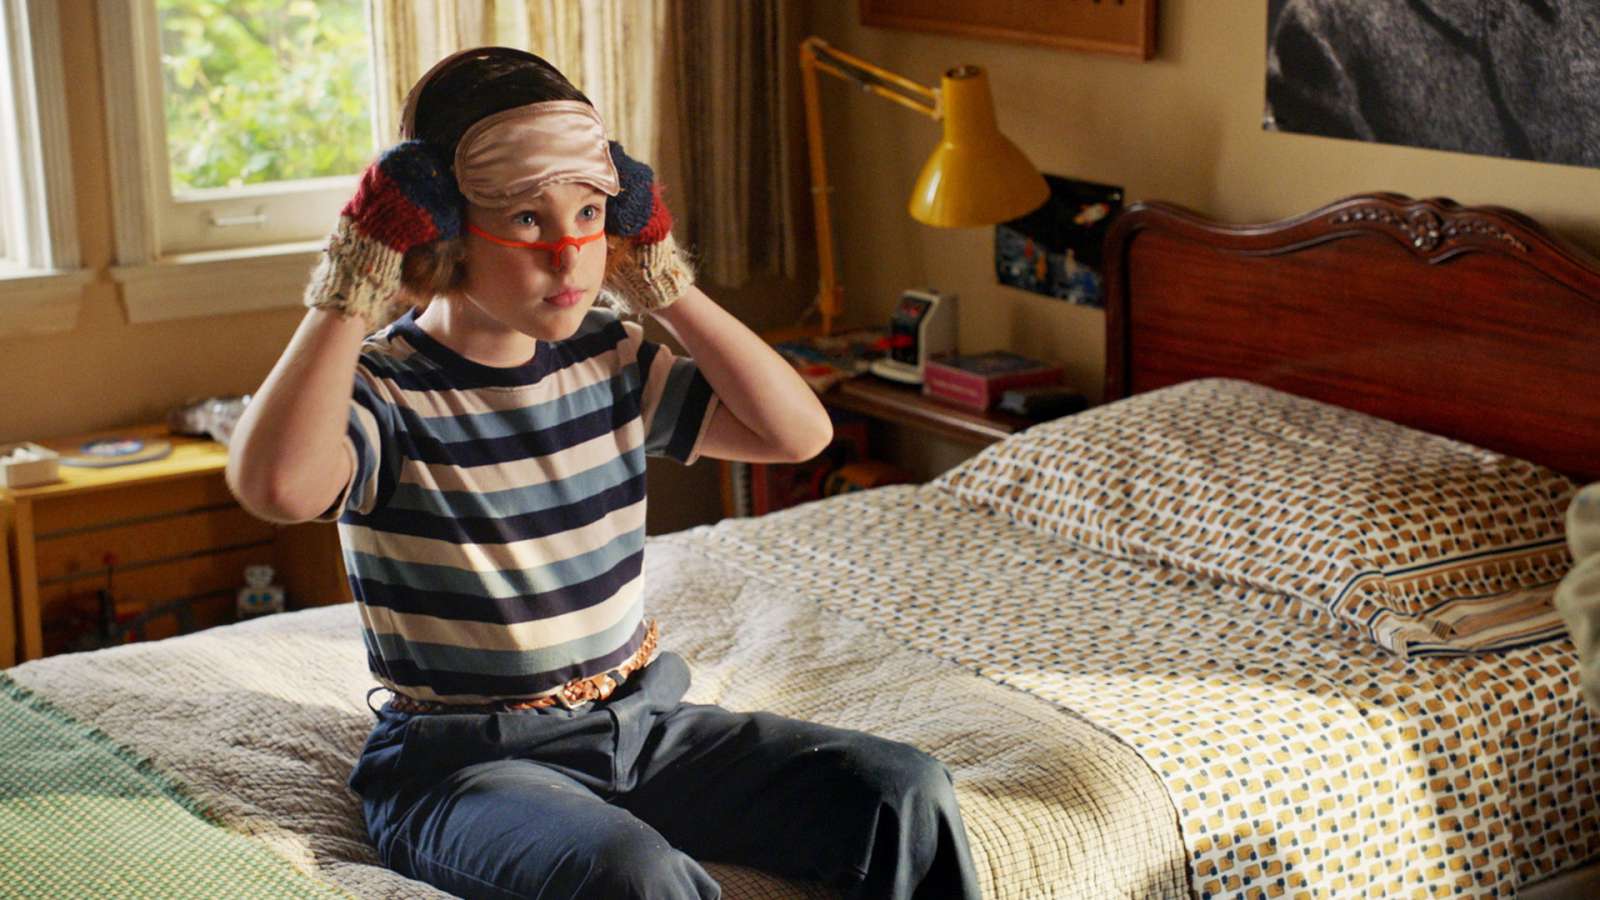 Young Sheldon : Hobbitses, Physicses and a Ball With Zip